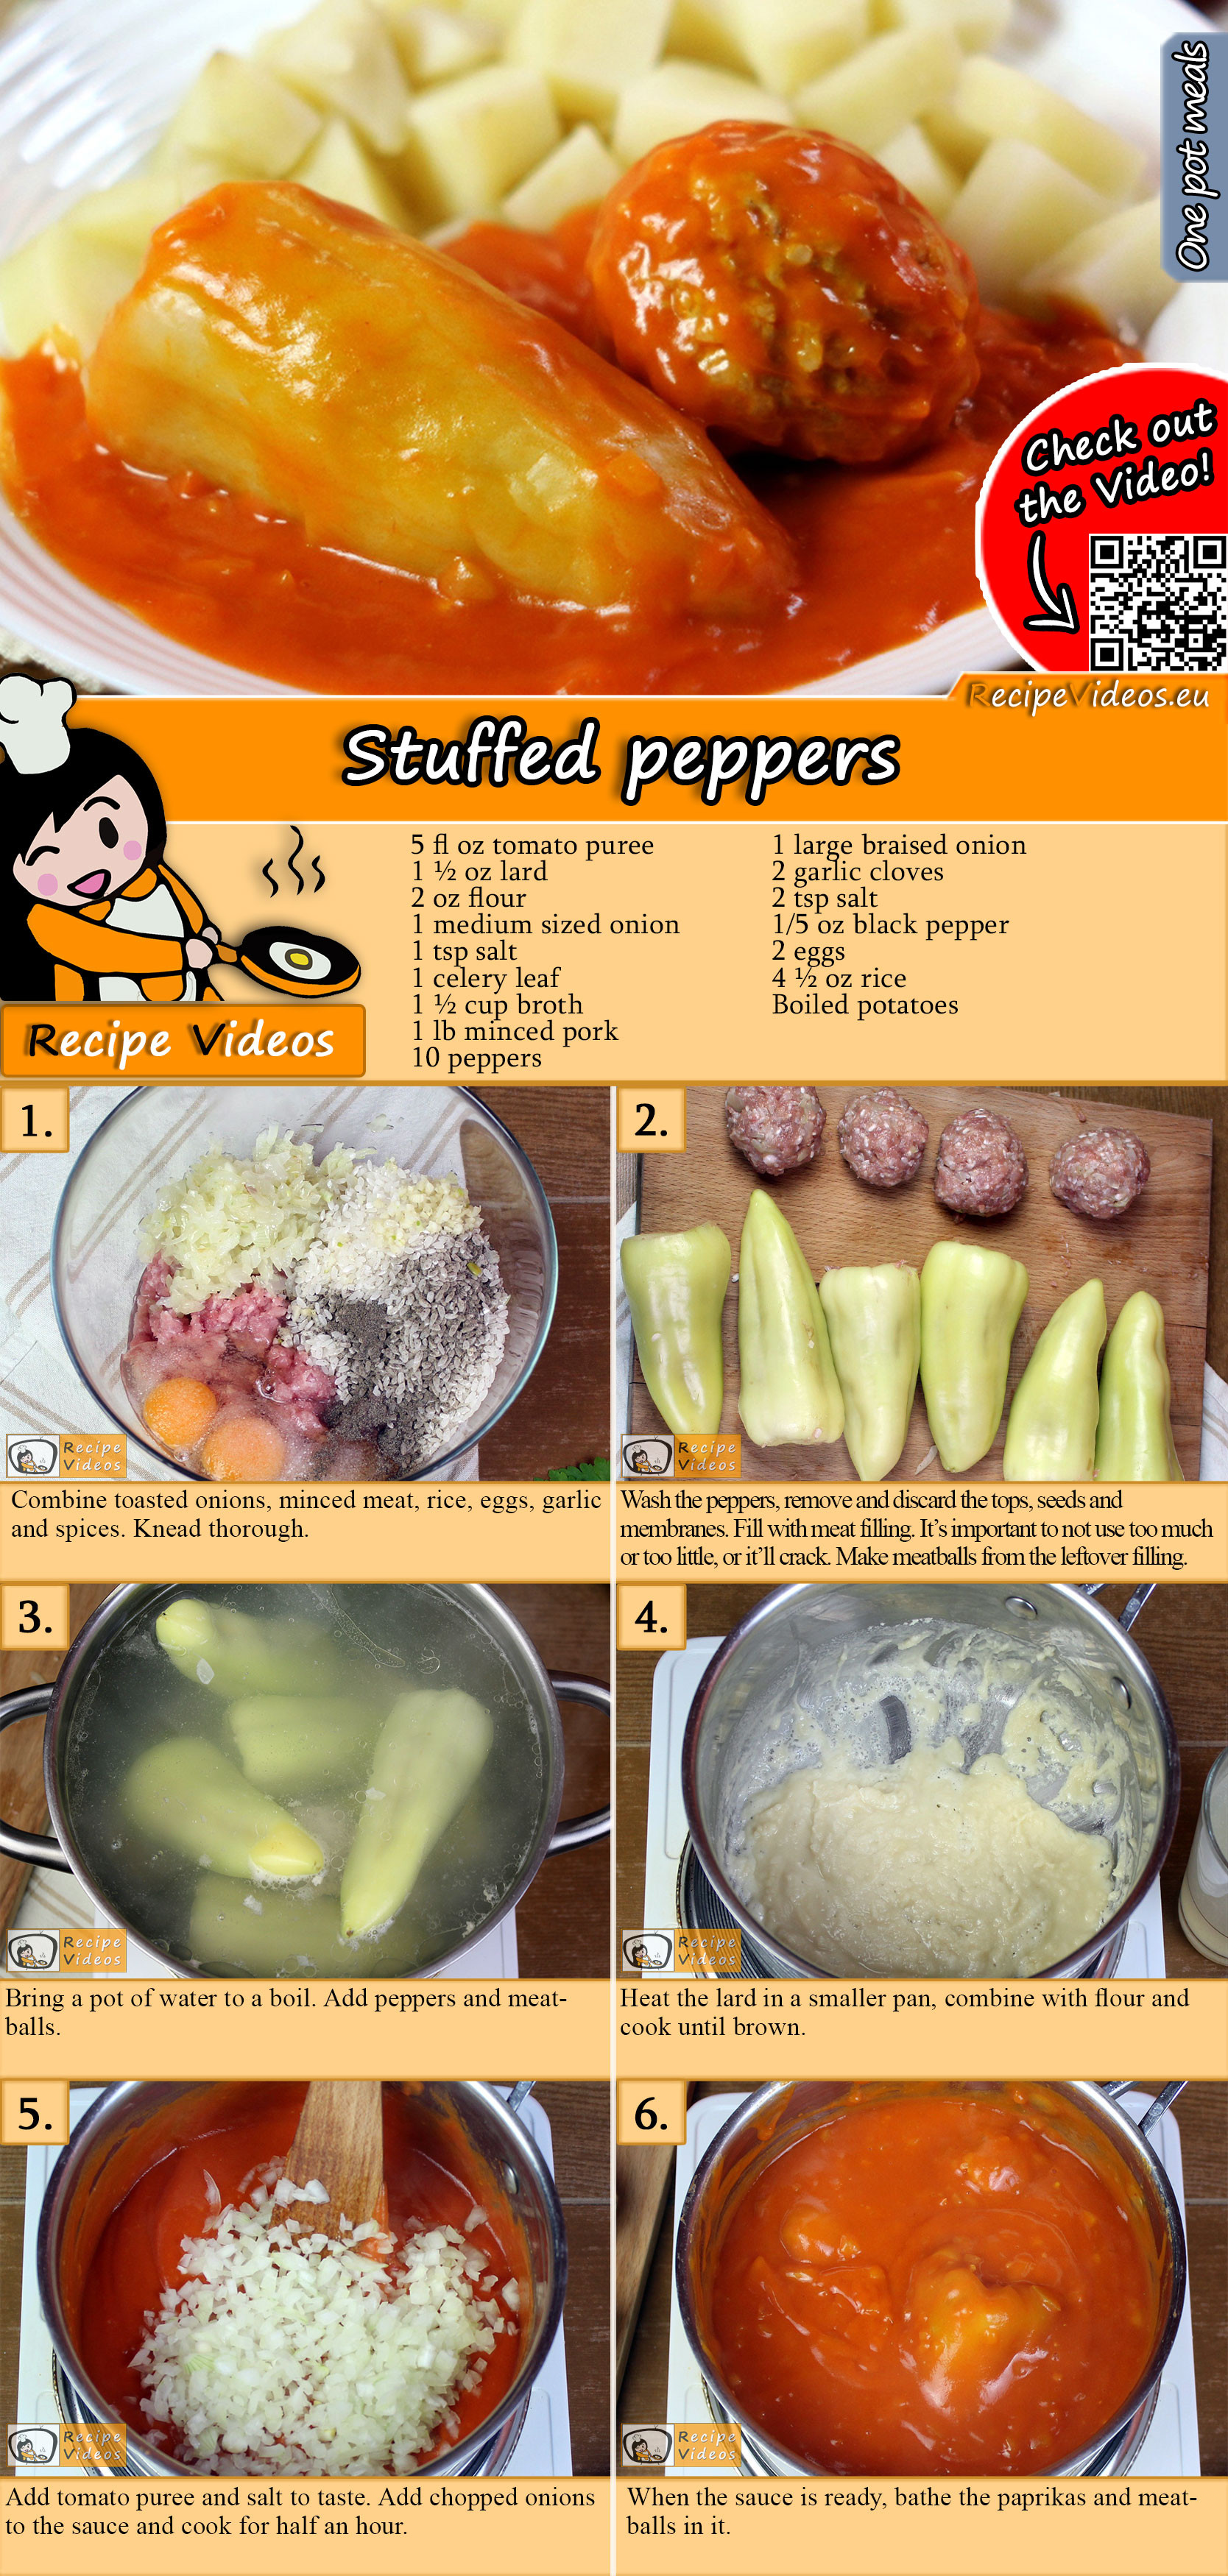 Stuffed peppers recipe with video